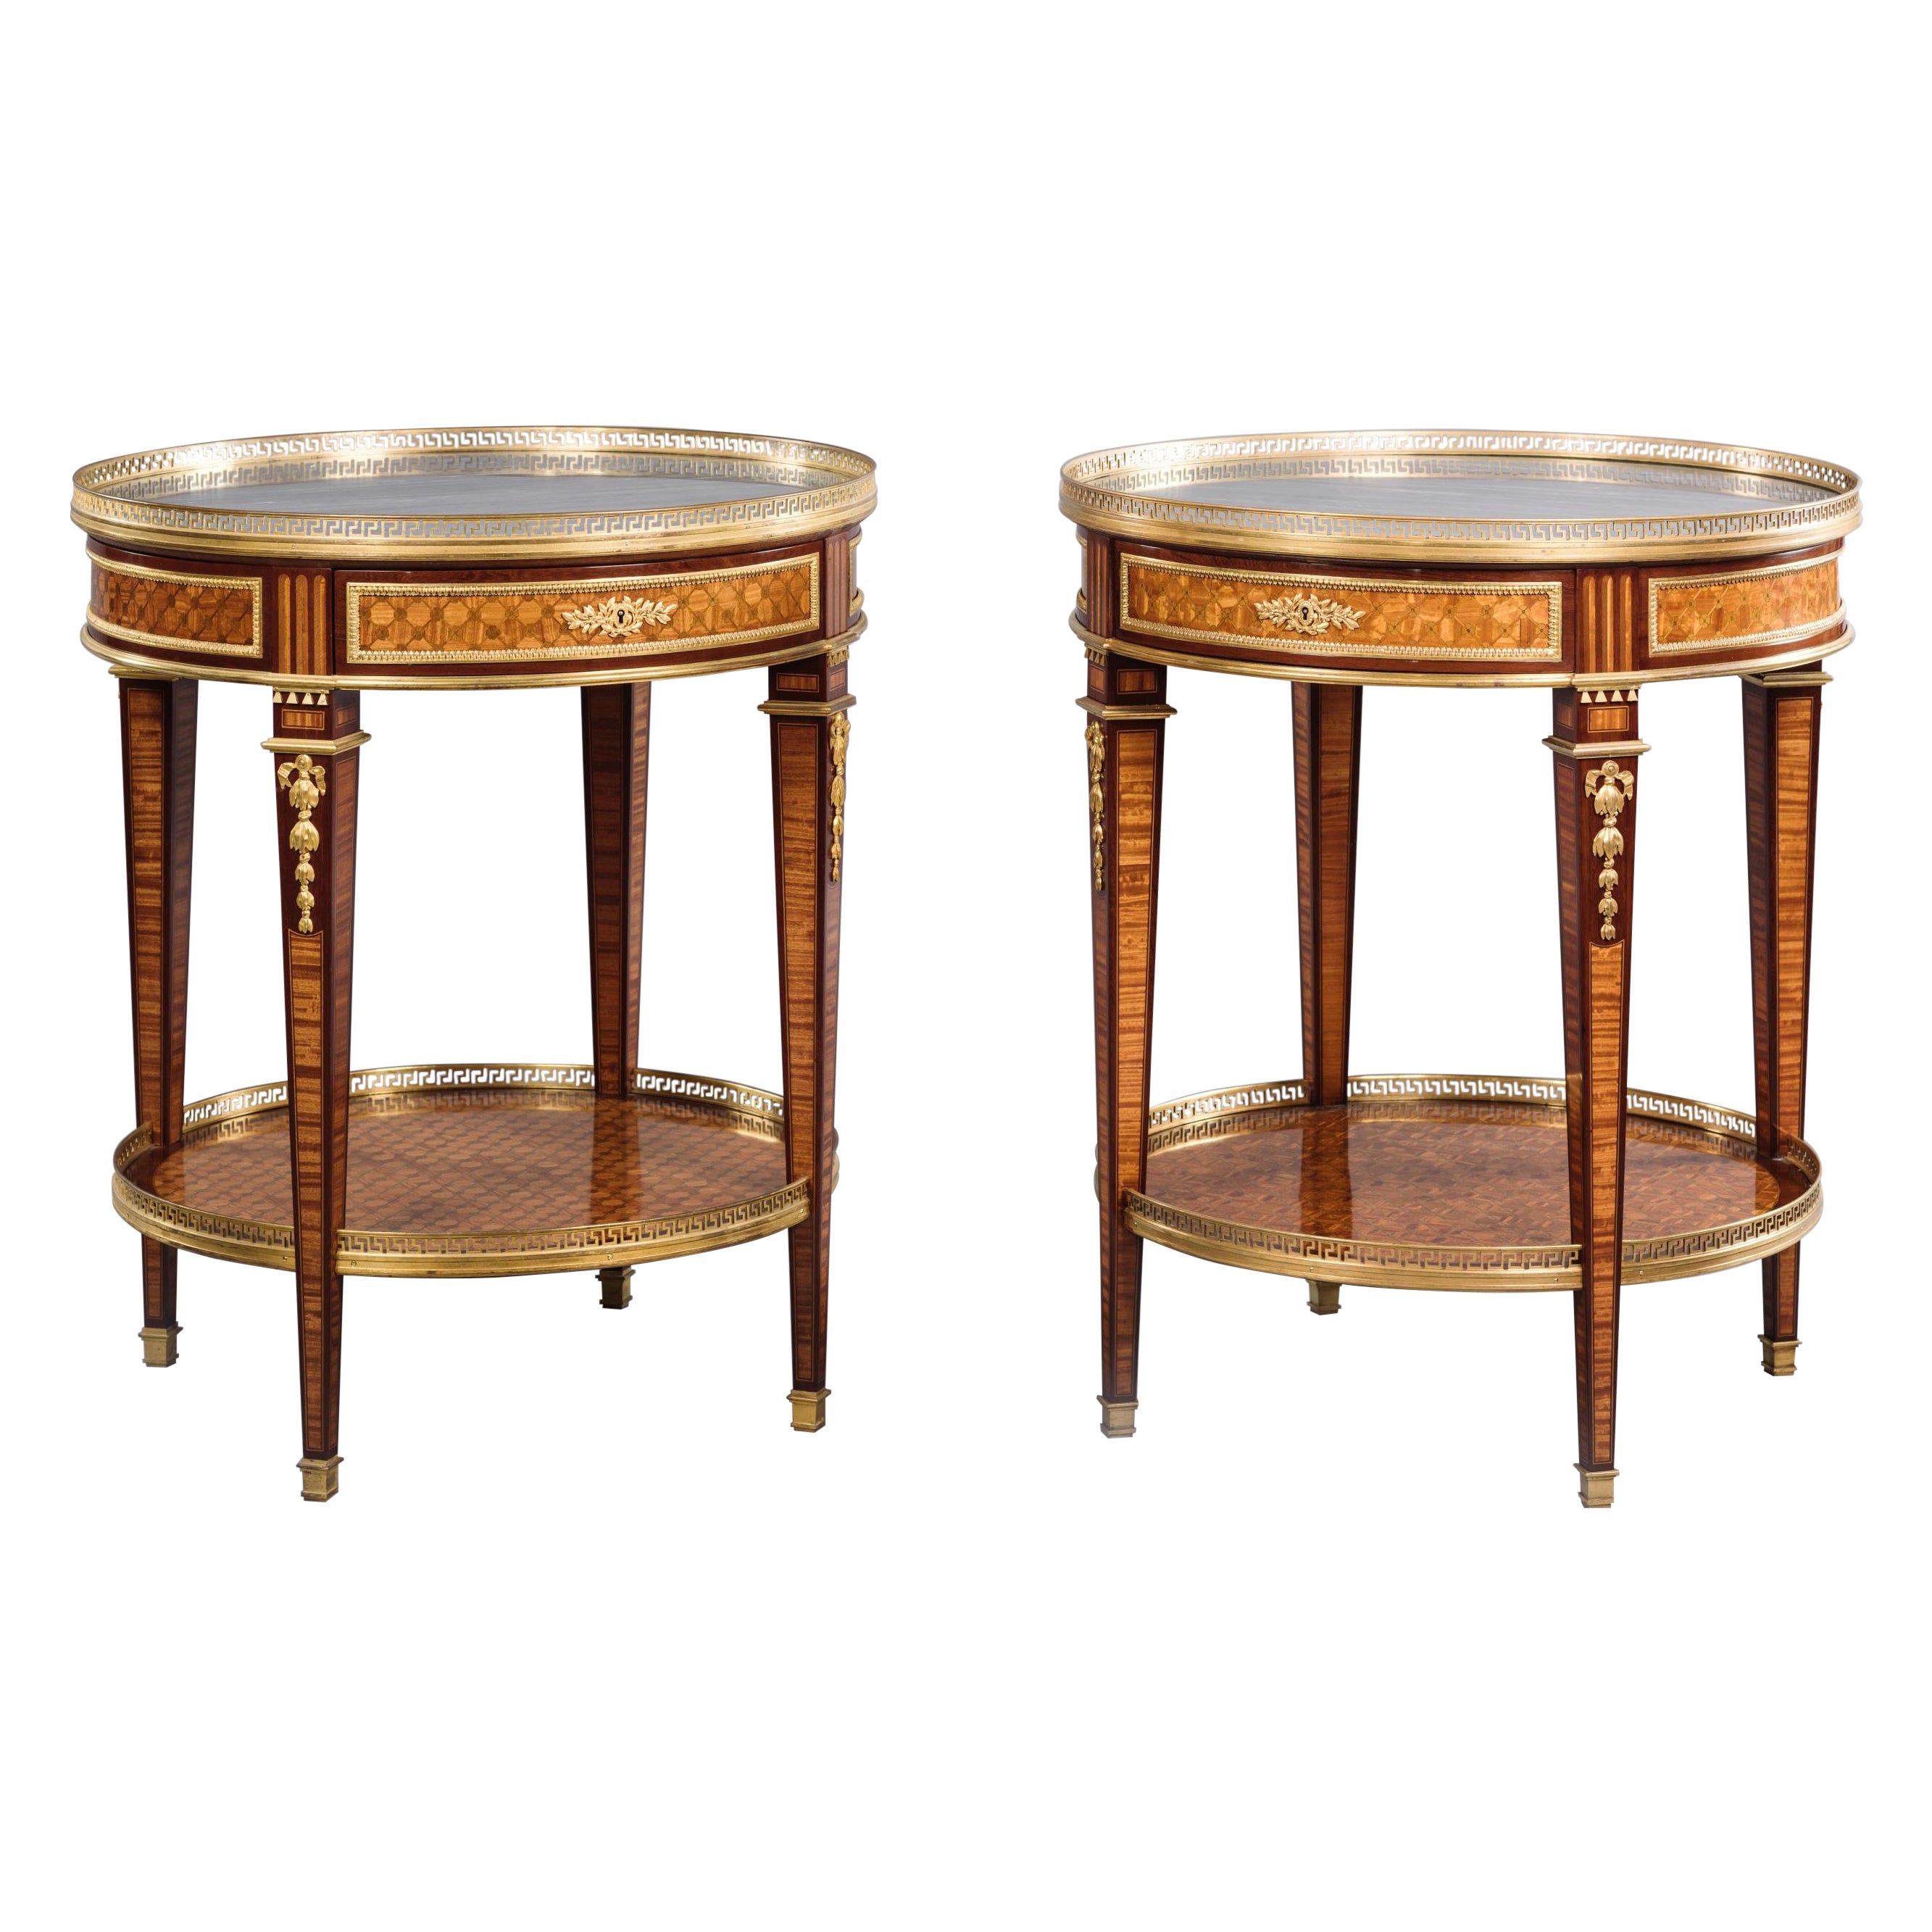 Rare Pair of Louis XVI Style Mounted Parquetry Gueridons For Sale